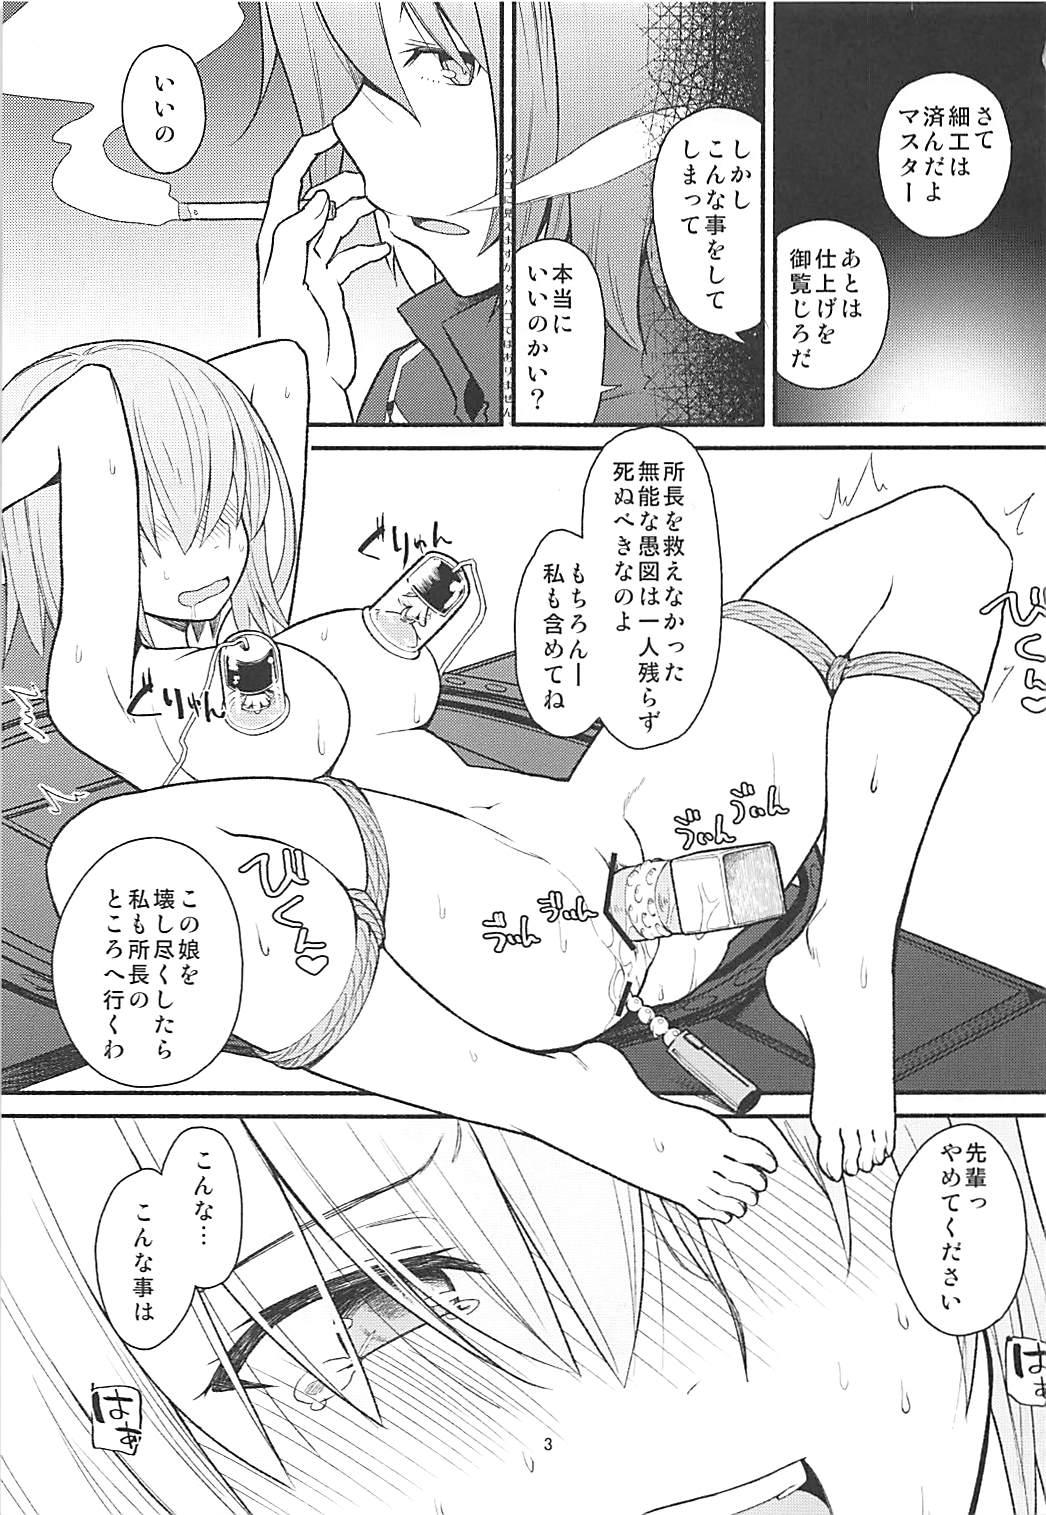 Nylon Tsumeawase - Fate grand order Bdsm - Page 2